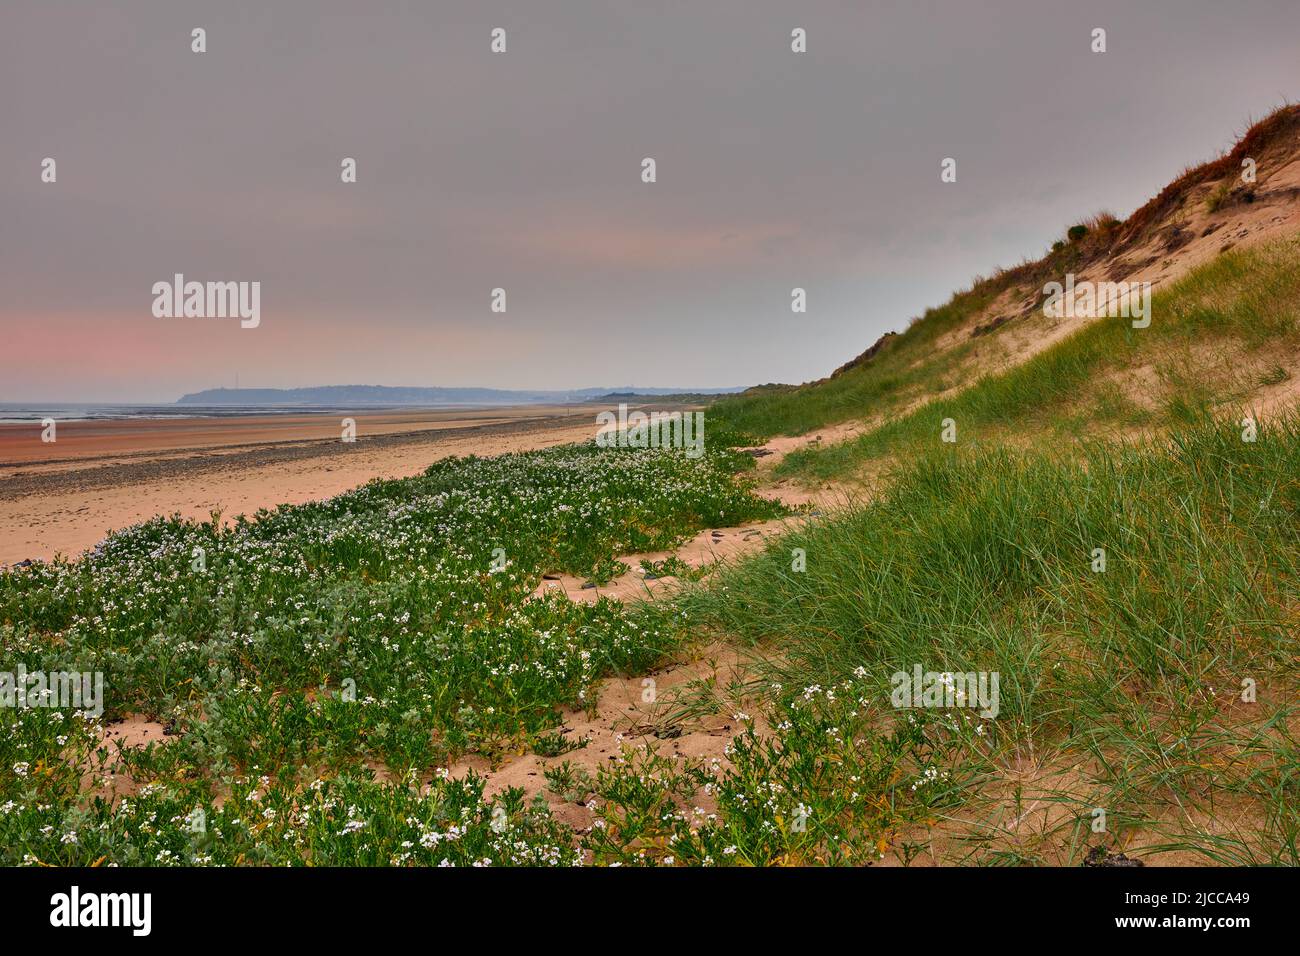 Image of sanddunes with sea in the background, sand and partly cloudy sky. Carteret, Normandy, France Stock Photo